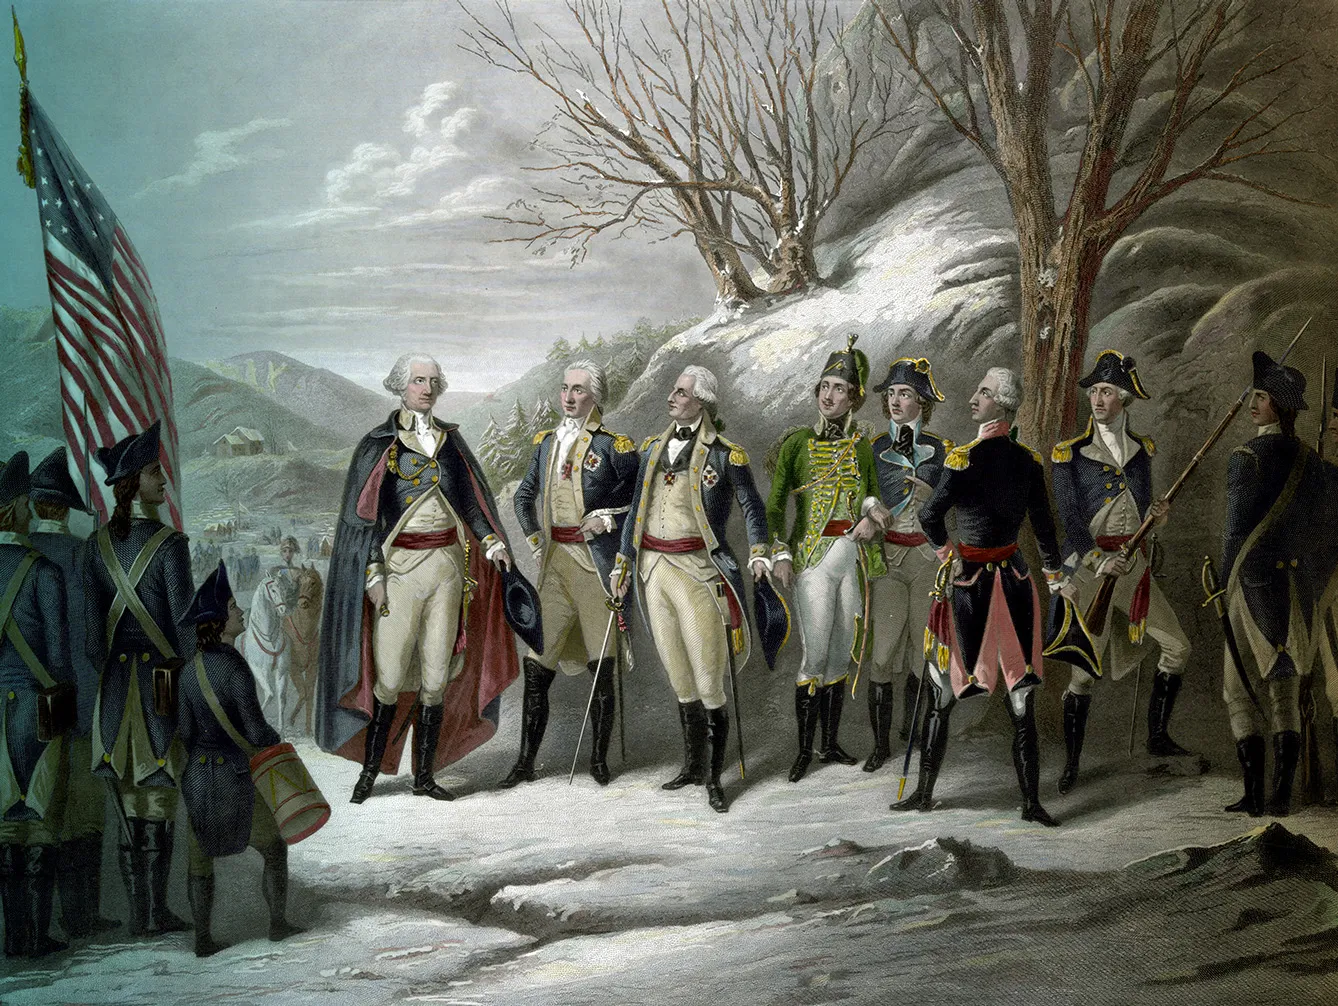 "The Heroes of the Revolution" by Frederick Girsch. Left to right: General George Washington and officers Johann De Kalb, Baron von Steuben, Kazimierz Pulaski, Tadeusz Kosciuszko, Marquis de Lafayette and John Muhlenberg, with Continental Army troops during the American Revolutionary War. Steel engraving, mid- to late 19th century.